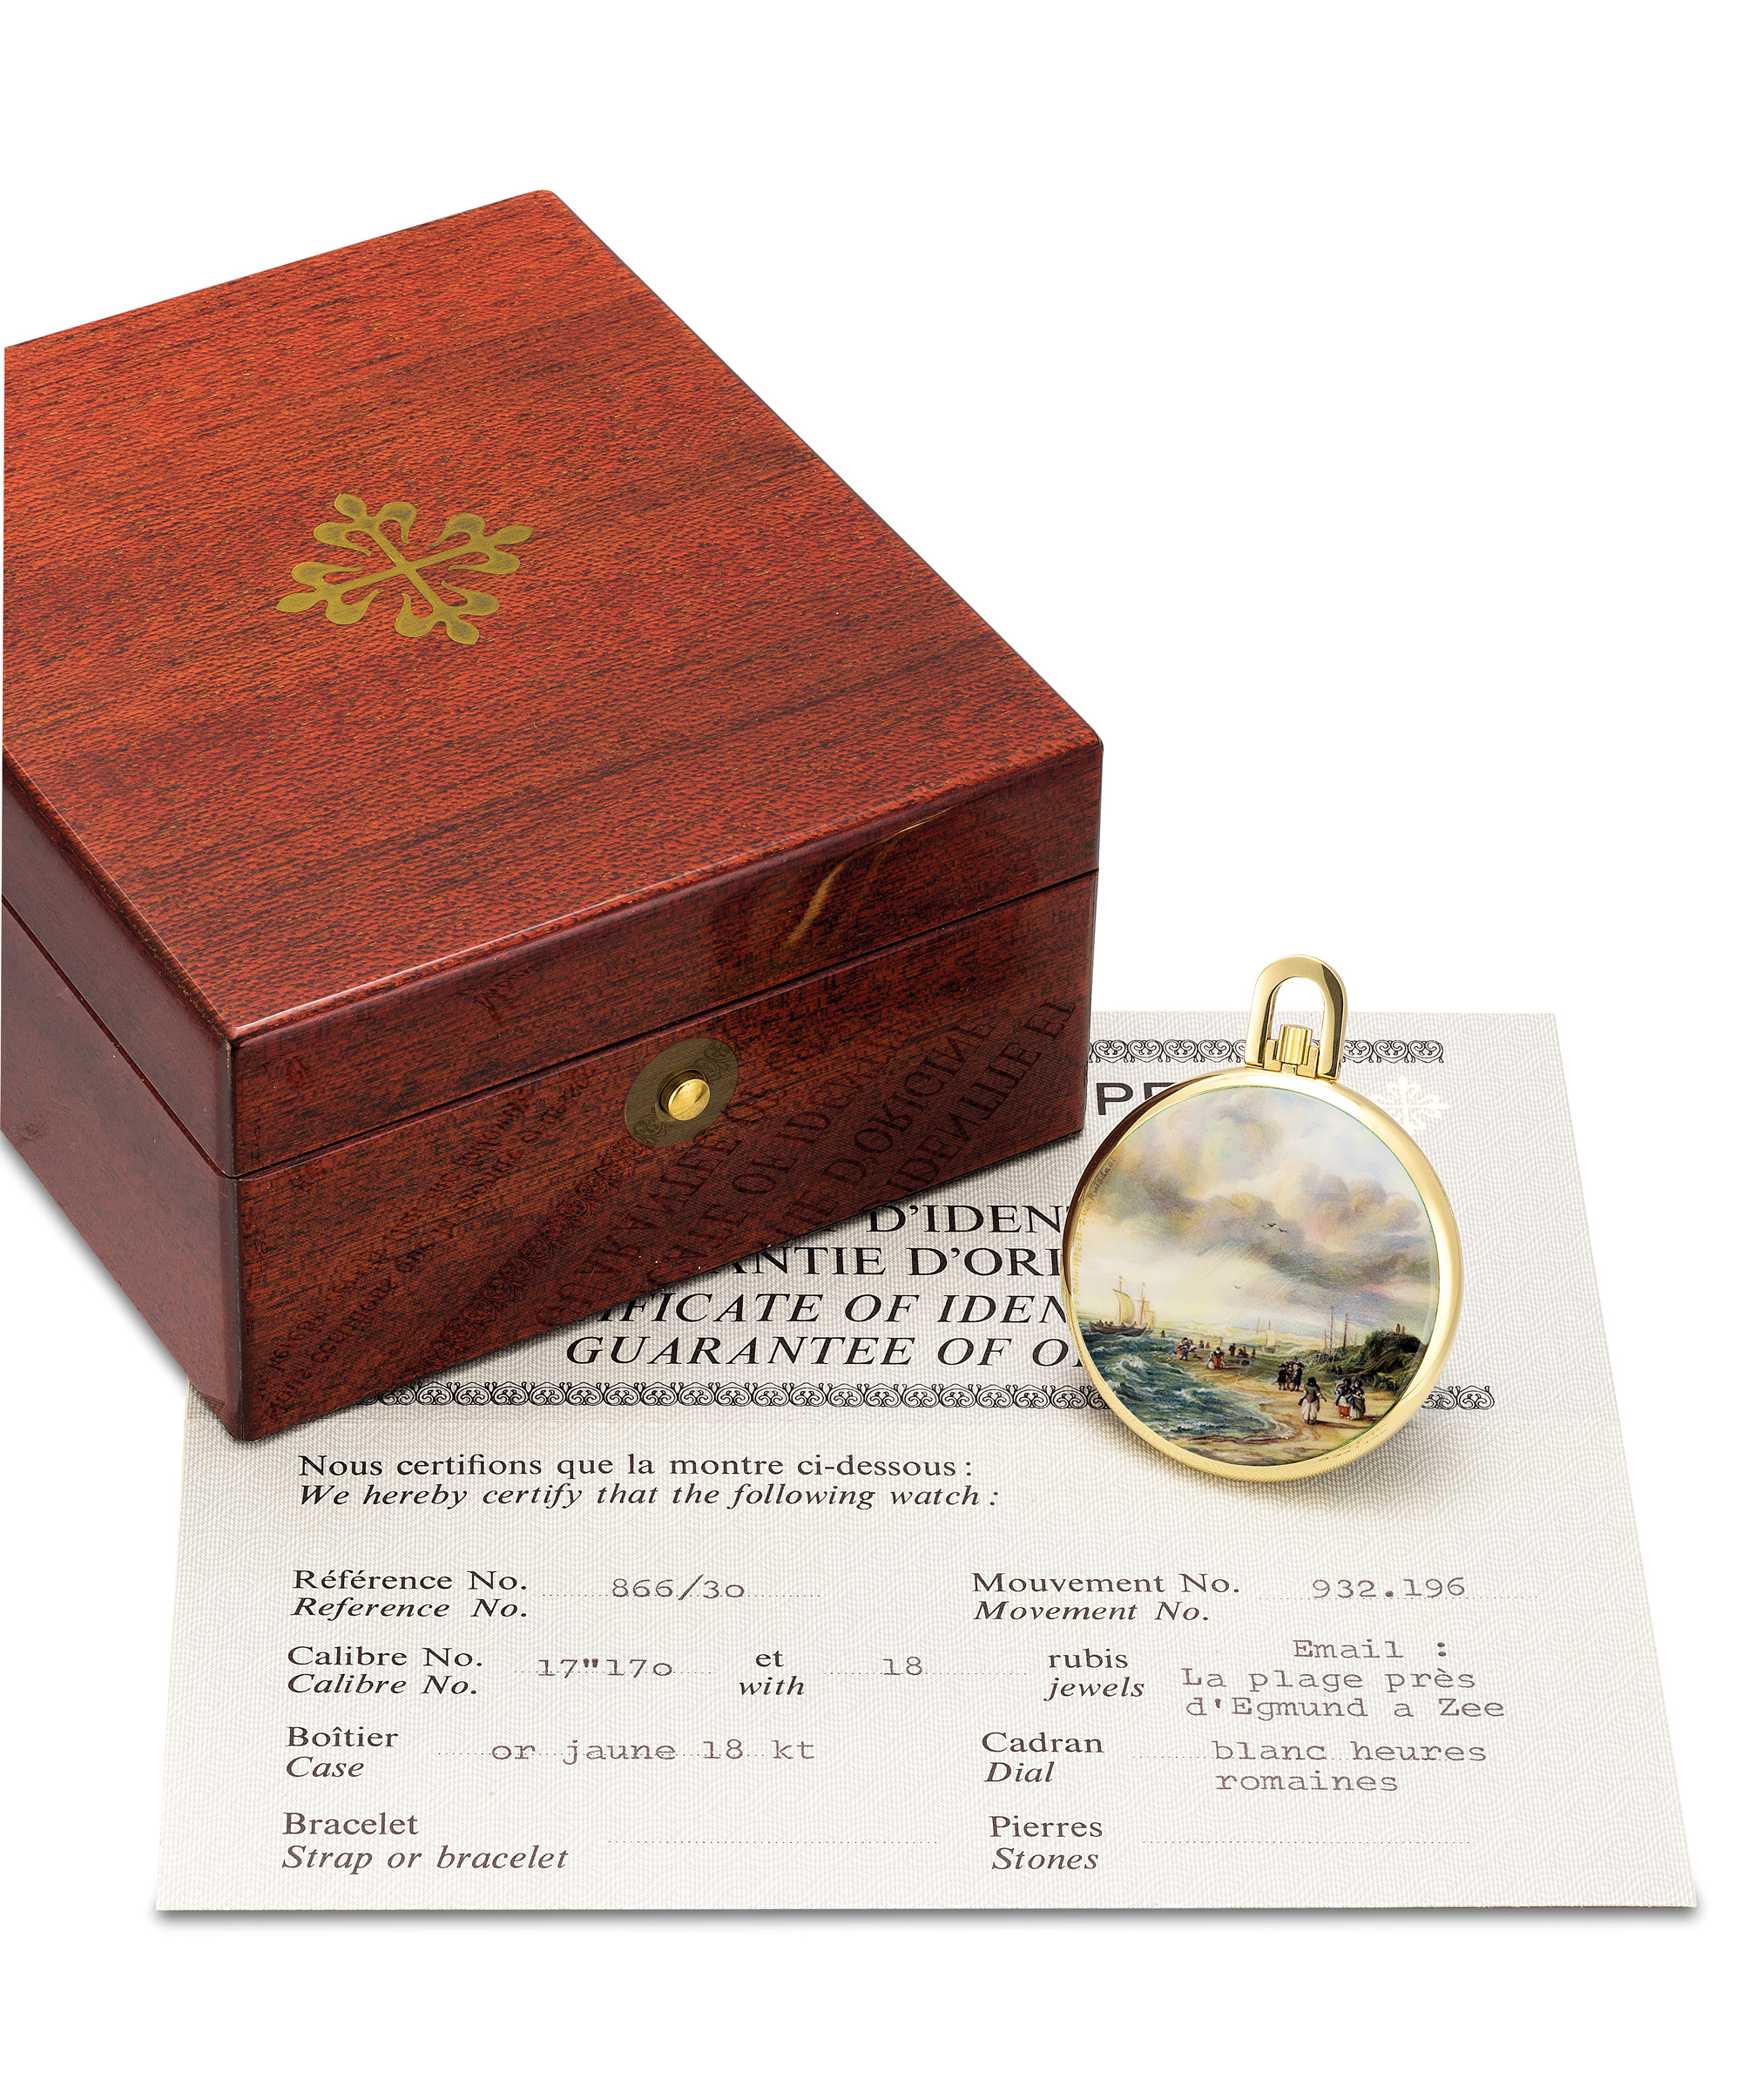 Yellow gold open face pocket watch, with a miniature enamel painting by Suzanne Rohr. Comes with the original certificate and a fitted presentation box. Sold for $410,560